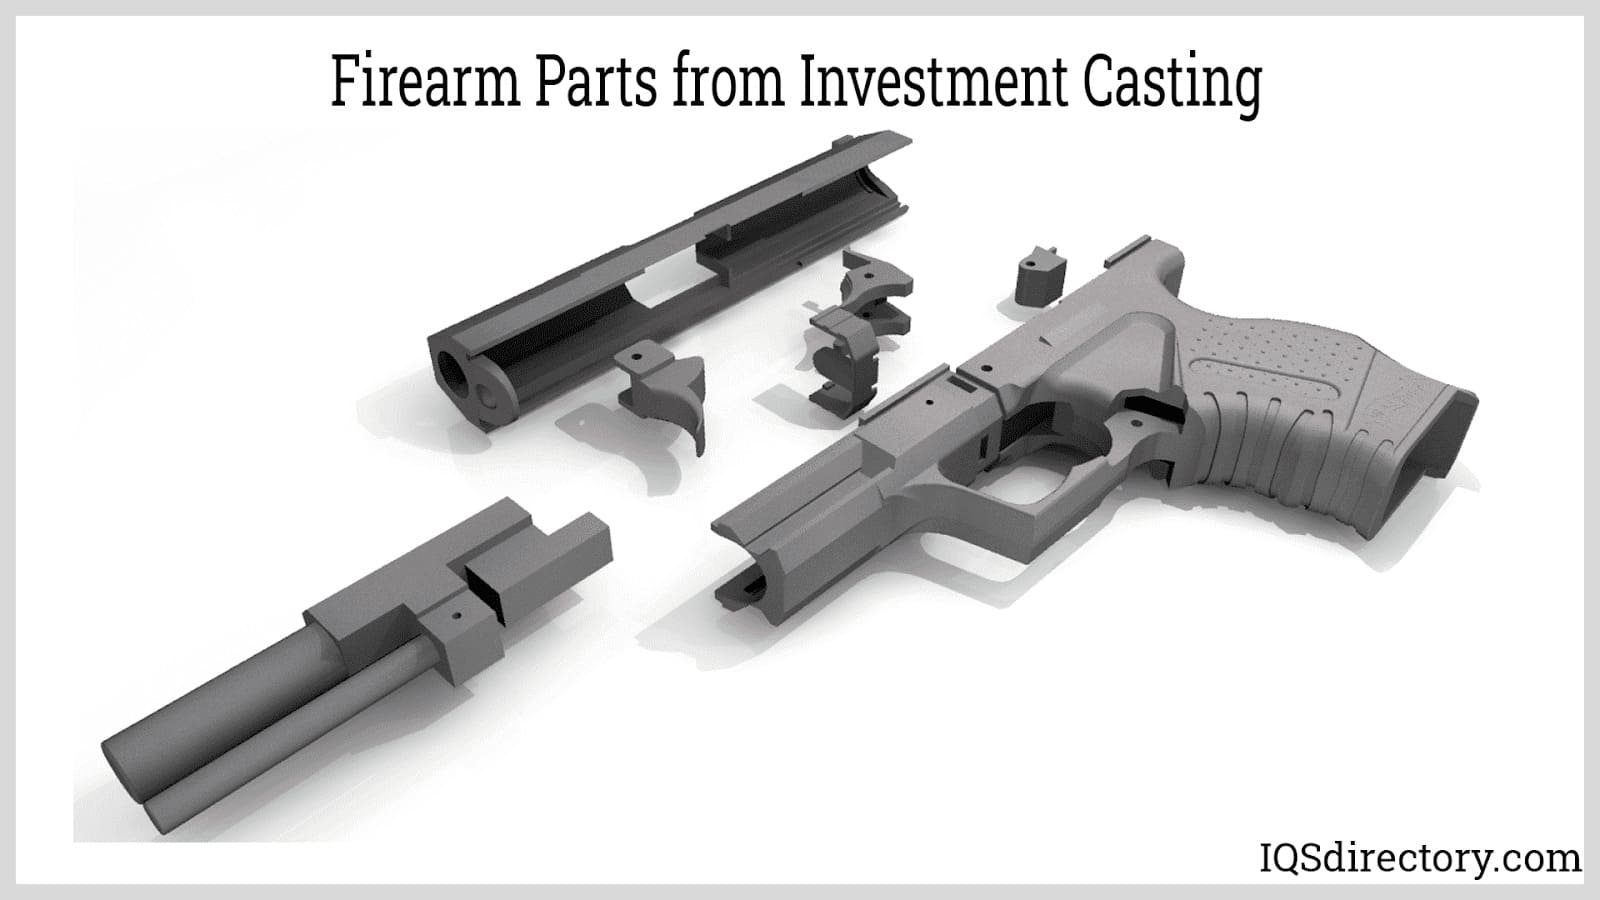 Firearm Parts from Investment Casting